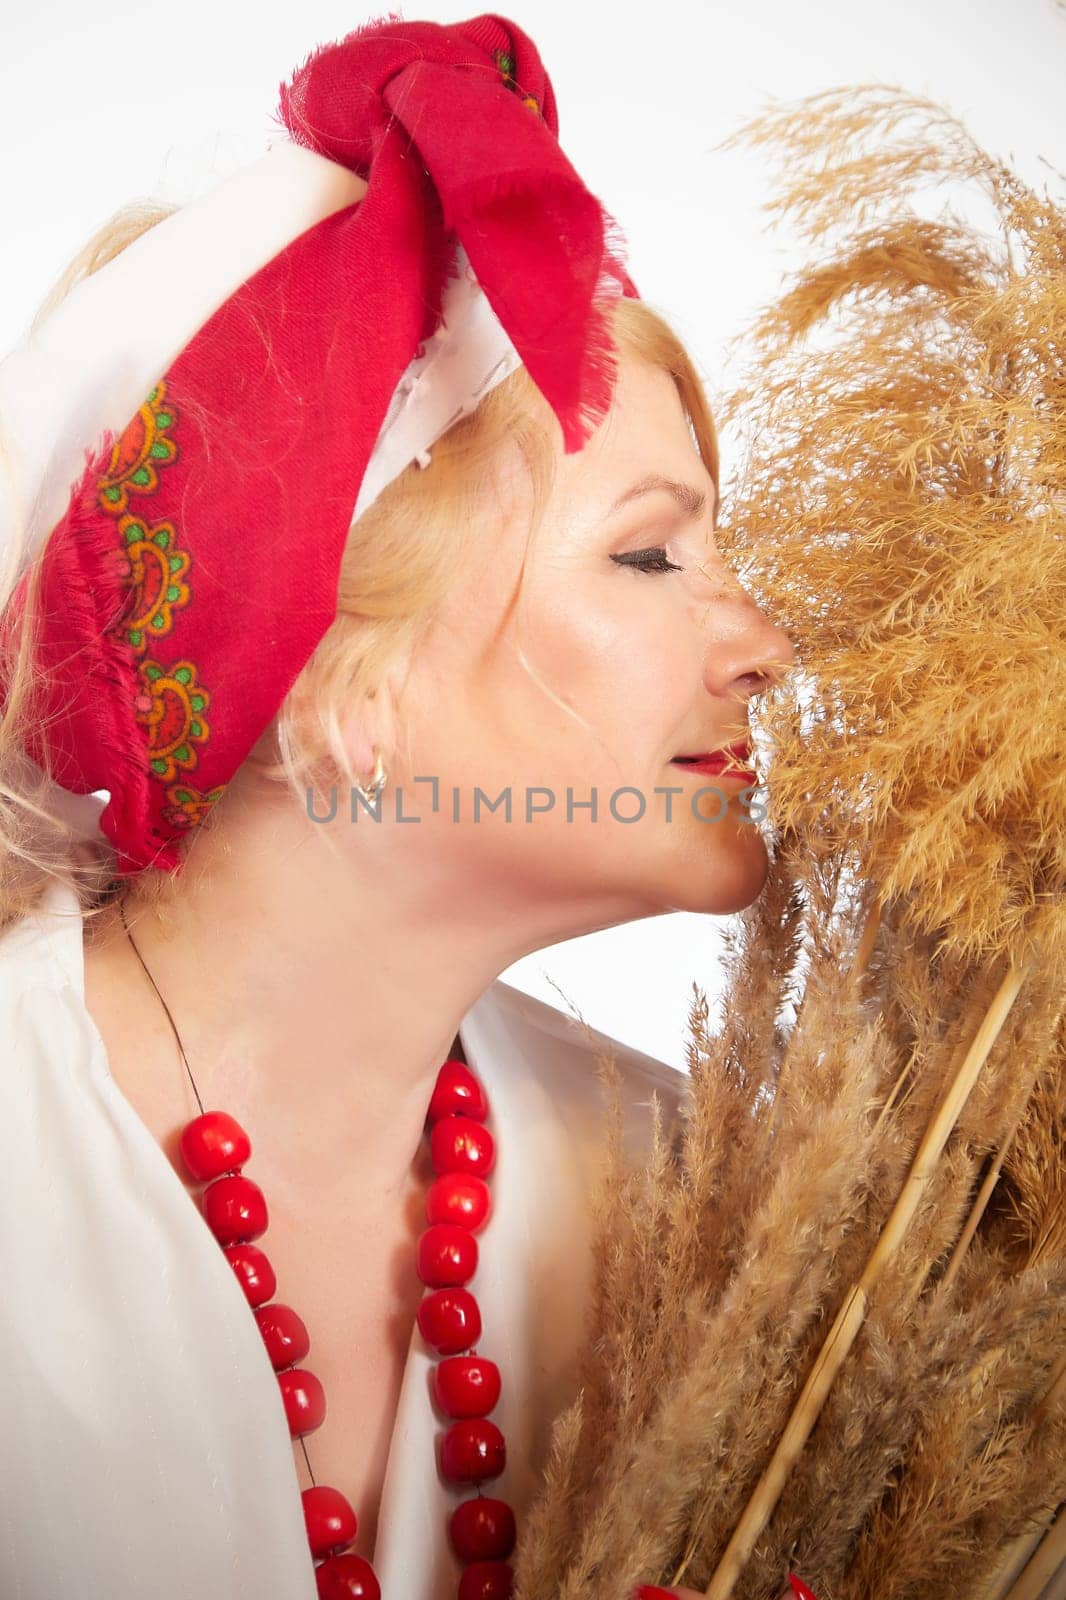 Portrait of heerful funny adult mature woman solokha with sheaf of ears. Female model in clothes of national ethnic Slavic style. Stylized Ukrainian, Belarusian or Russian woman in comic photo shoot by keleny